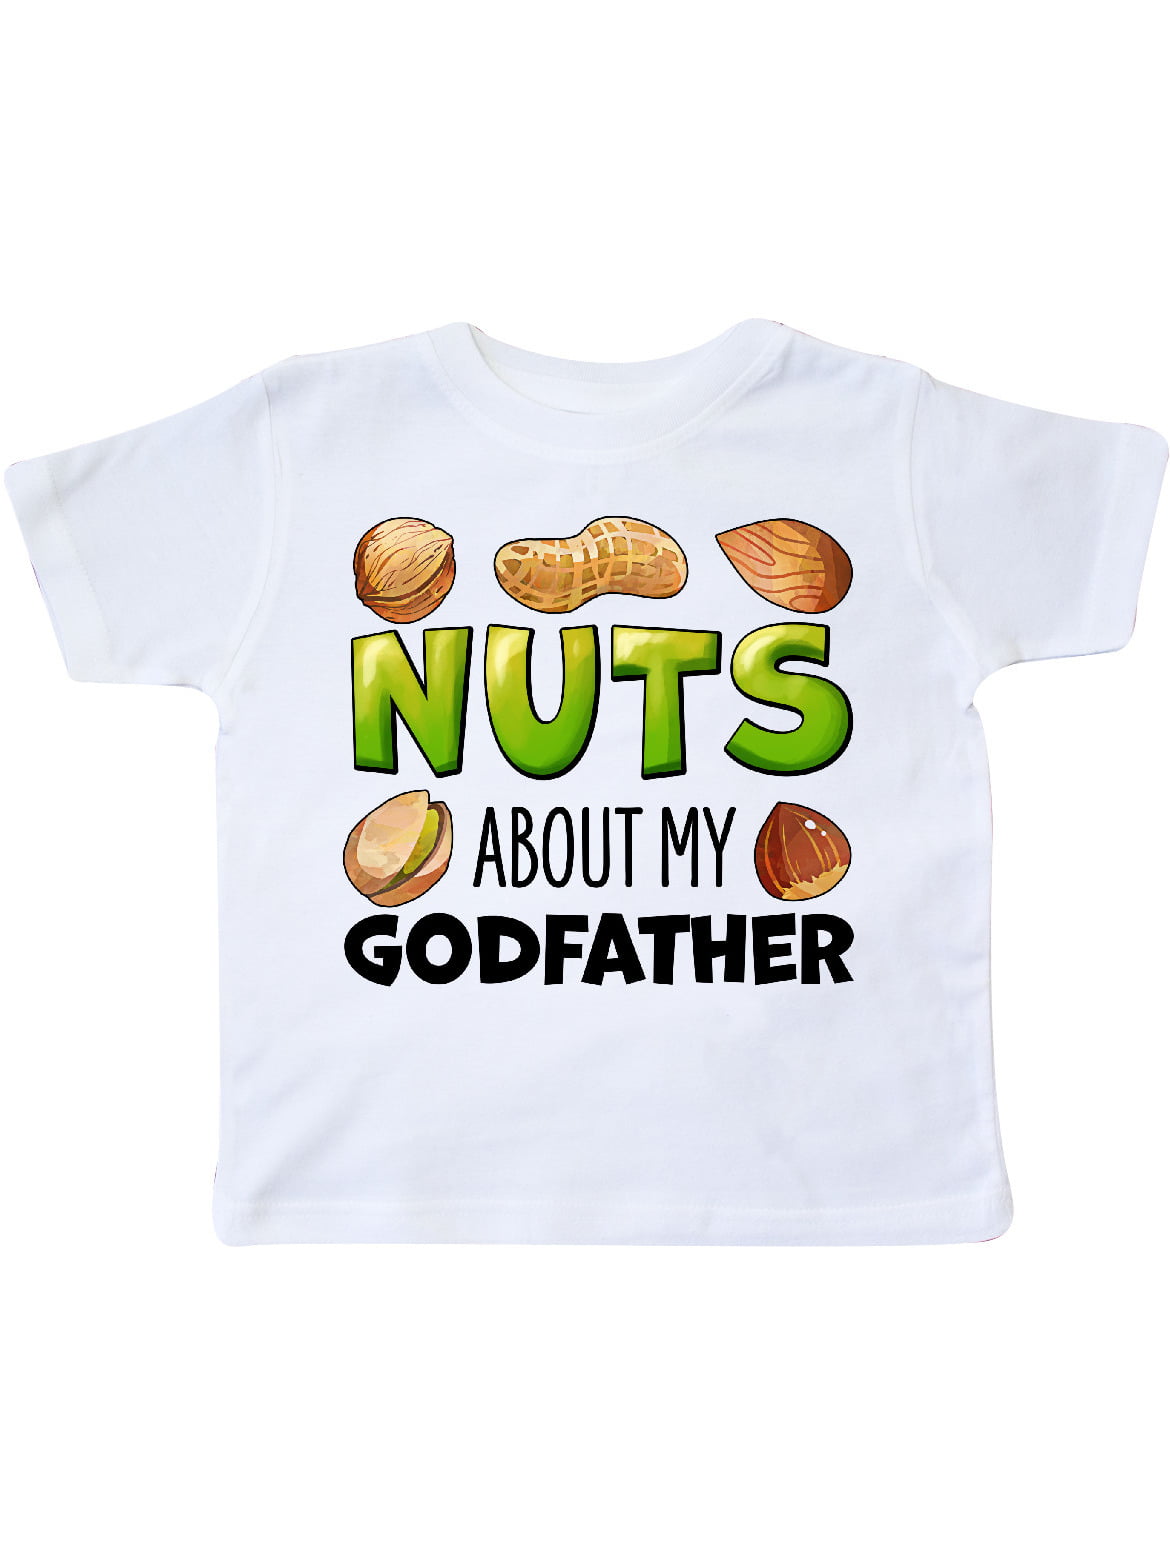 Toddler/Kids Ruffle T-Shirt Im Going On an Airplane with My Godfather Pack My Stuff 